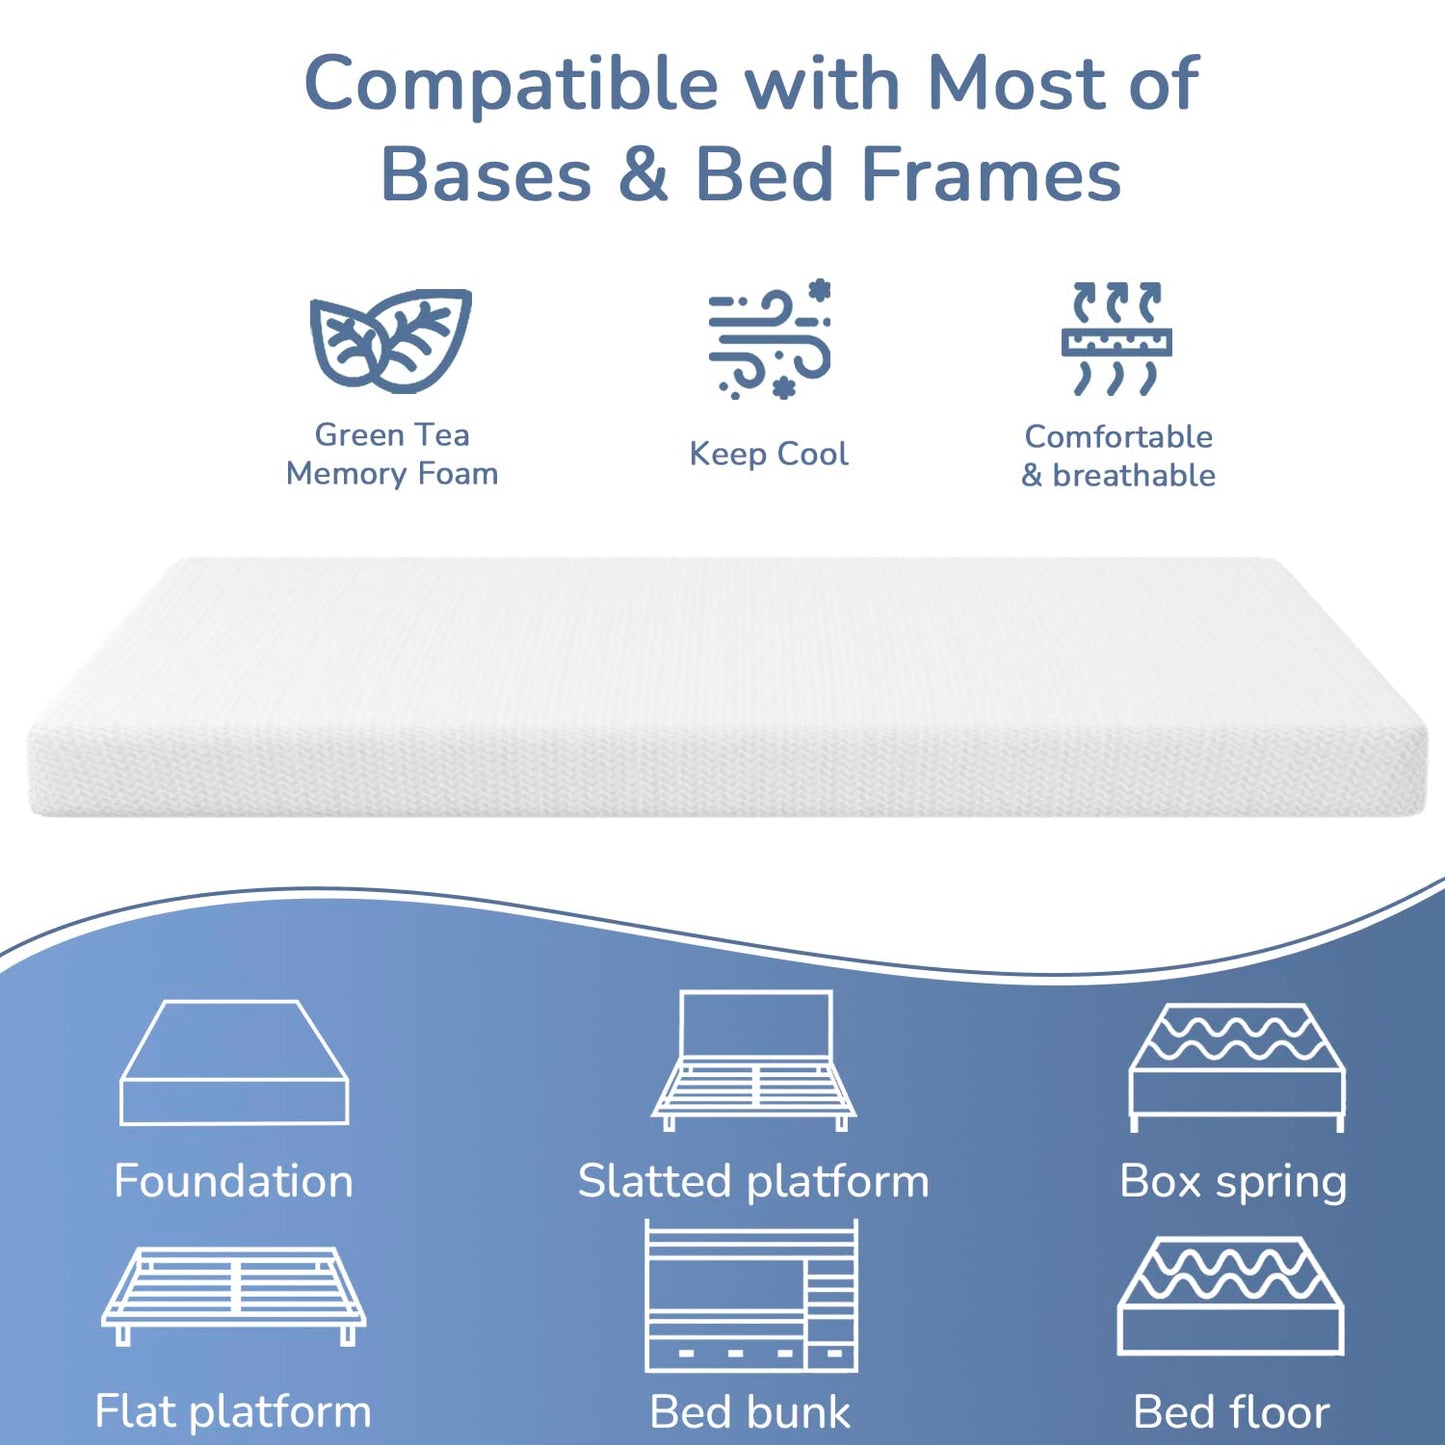 PayLessHere 5 Inch Green Tea Memory Foam Mattress Cooling Gel Infused Mattress,Medium Firm Mattresses Fiberglass Free/CertiPUR-US Certified/Bed-in-a-Box/Pressure Relieving Full Size,White